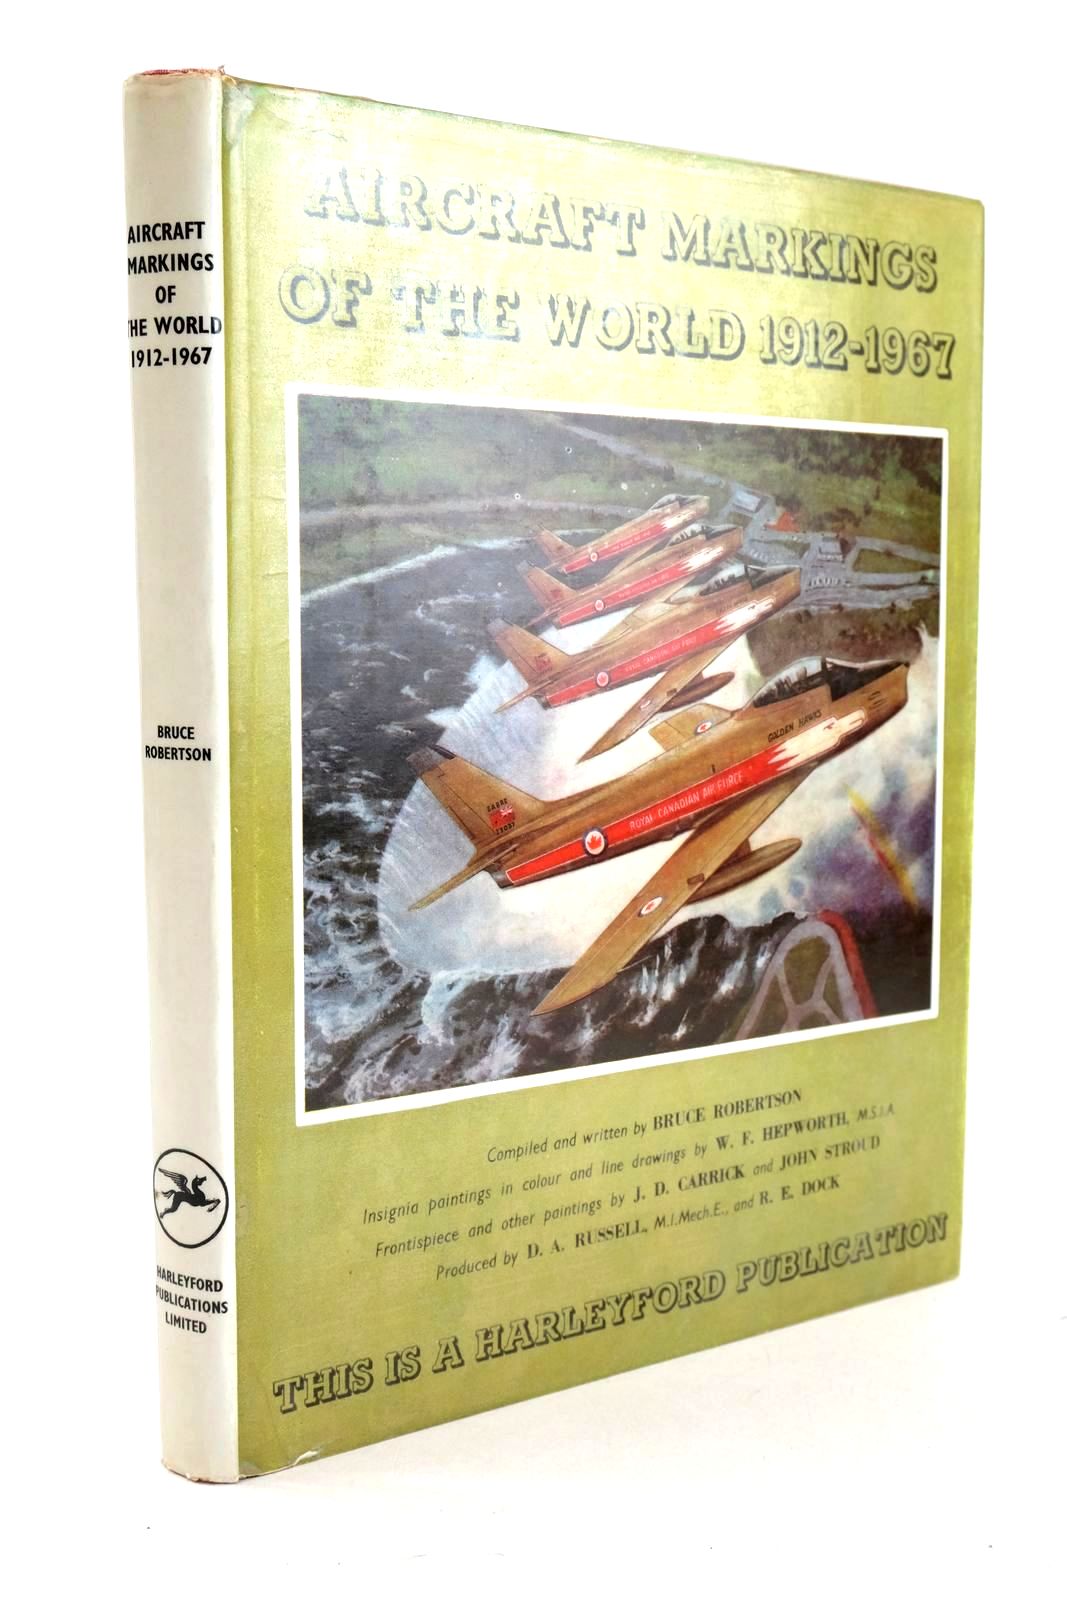 Photo of AIRCRAFT MARKINGS OF THE WORLD 1912-1967 written by Robertson, Bruce illustrated by Hepworth, W.F. Stroud, John Carrick, J.D. published by Harleyford Publications Limited (STOCK CODE: 1326657)  for sale by Stella & Rose's Books